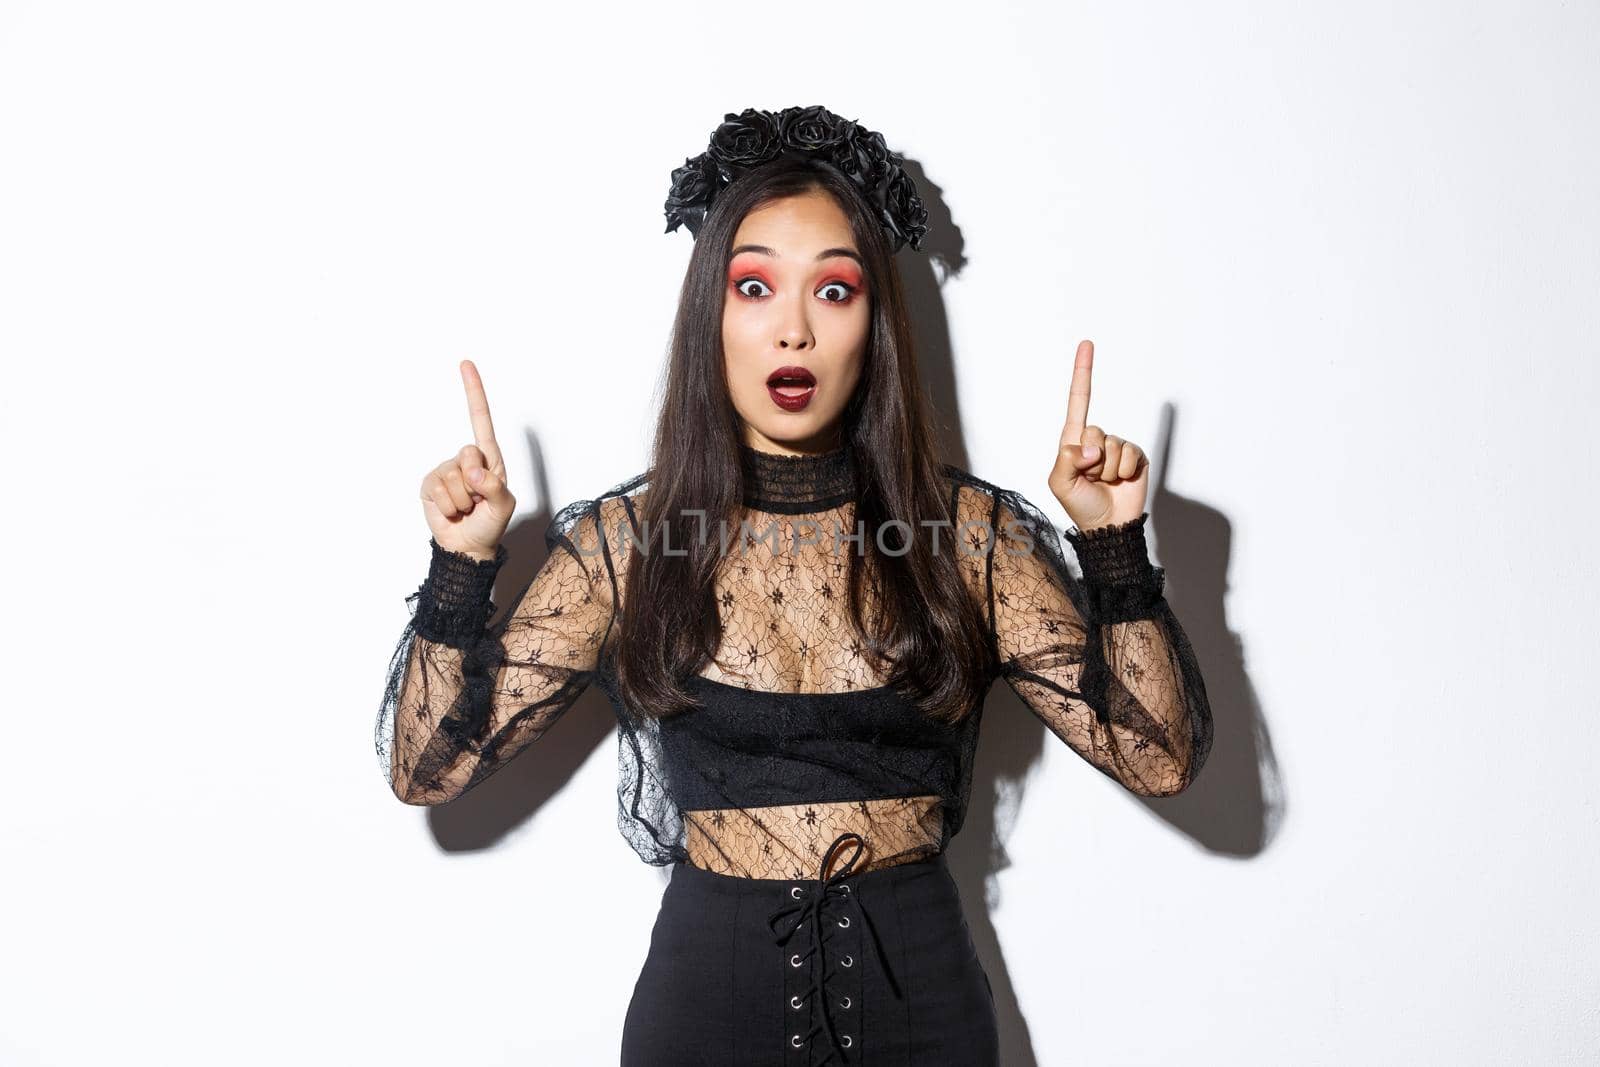 Impressed asian girl in black lace dress and wreat turn your attention on halloween promo, making announcement, pointing fingers up, showing banner, standing over white background.